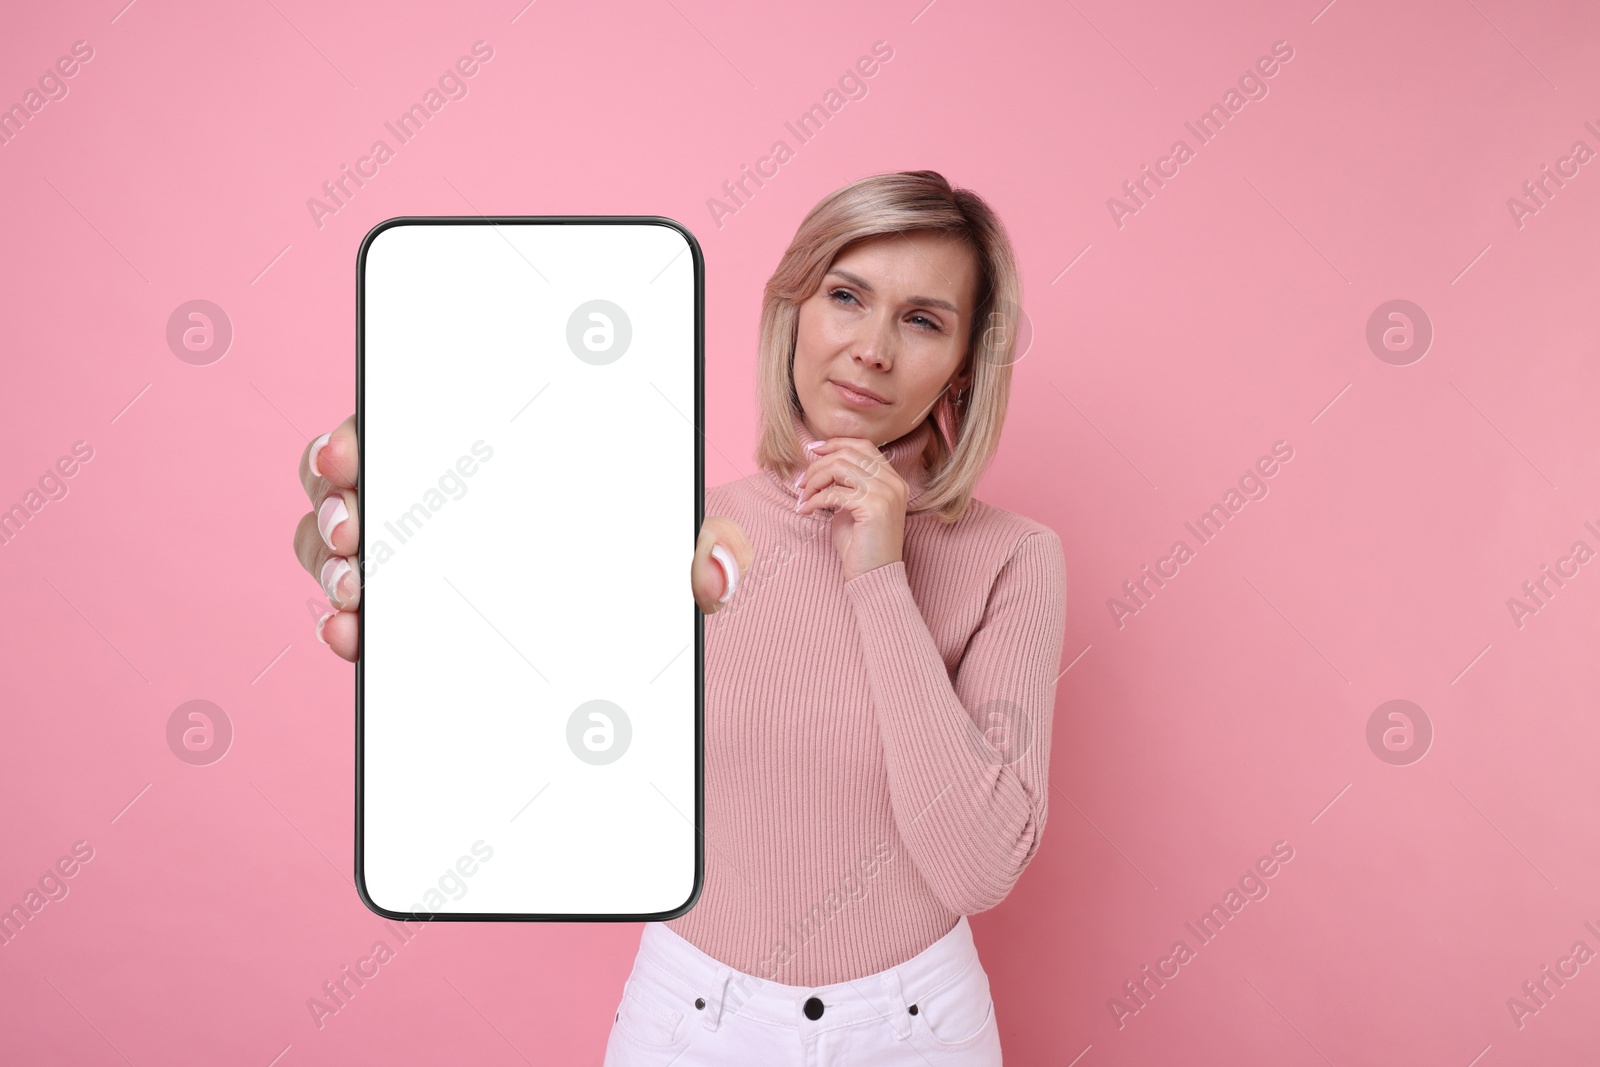 Image of Thoughtful woman showing mobile phone with blank screen on pink background. Mockup for design